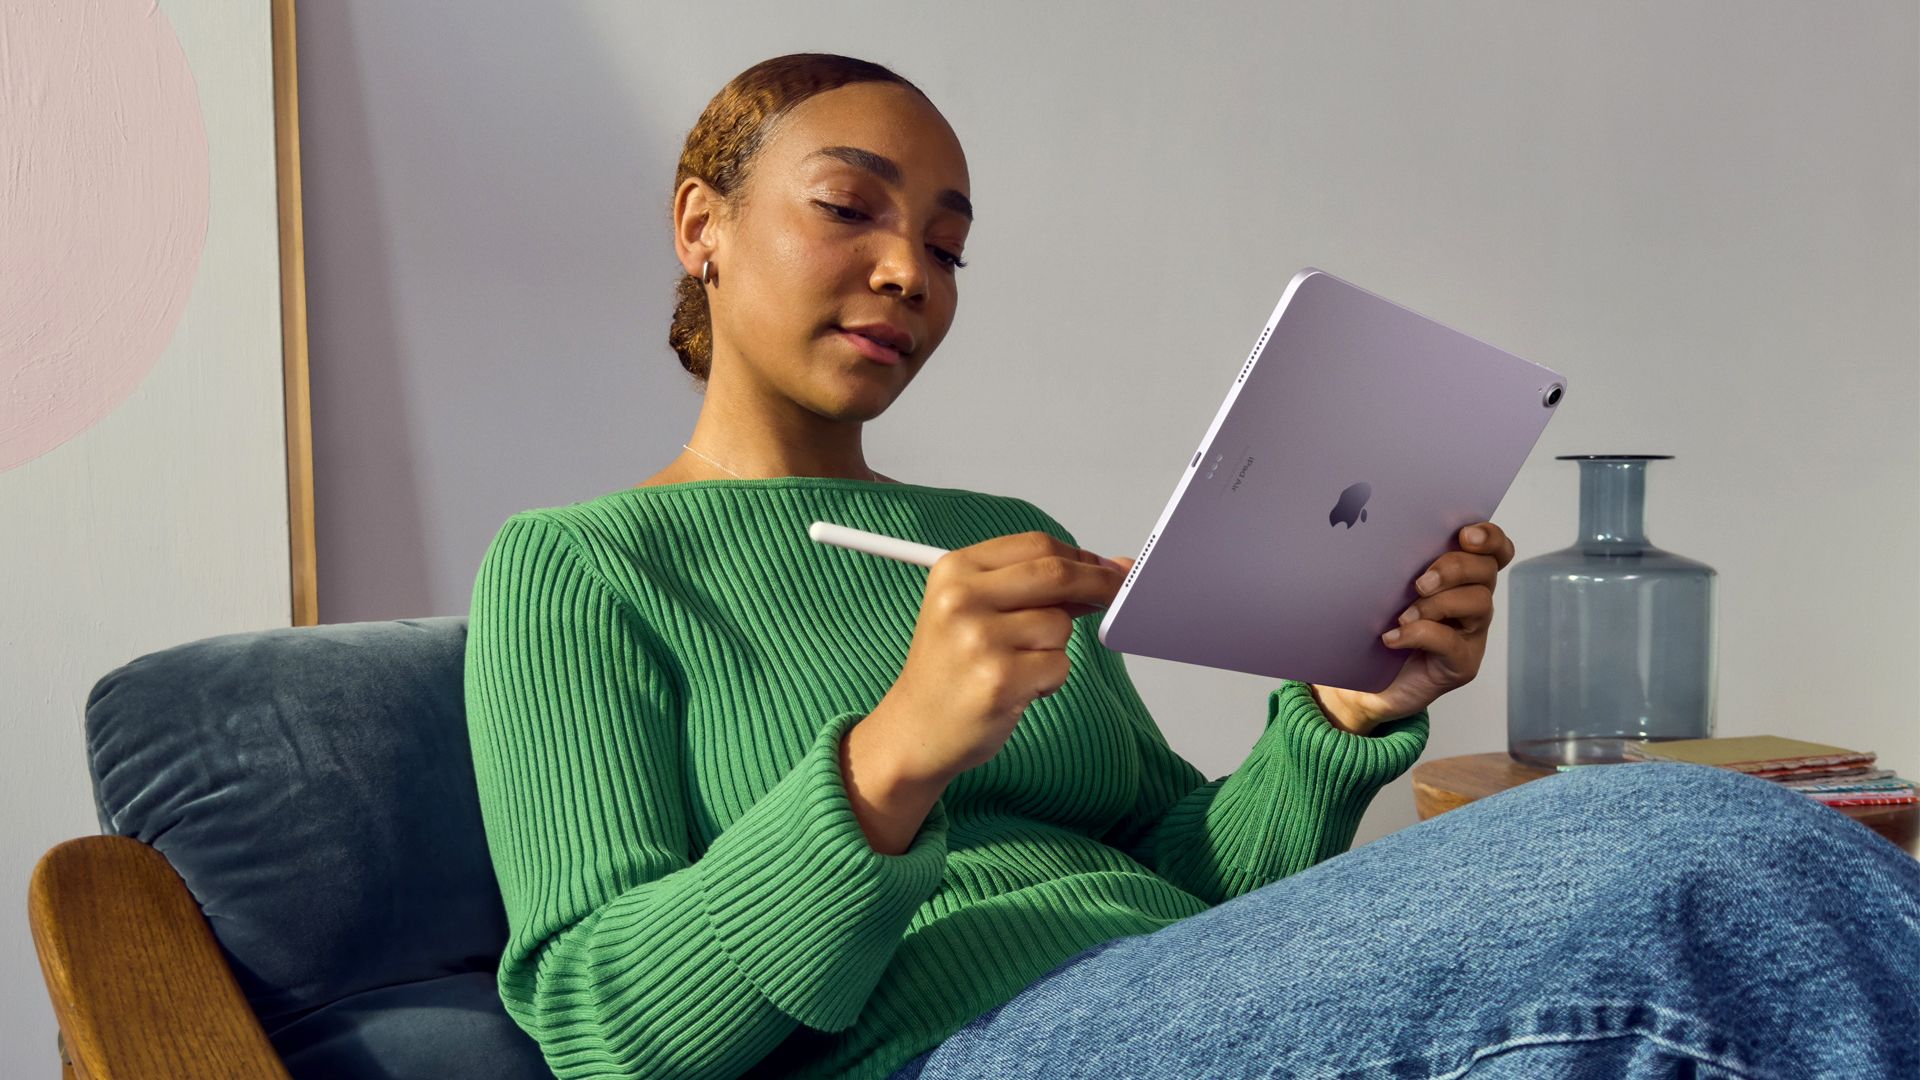 All of Apple’s new cellular iPad Airs and iPad Pros are eSIM-only